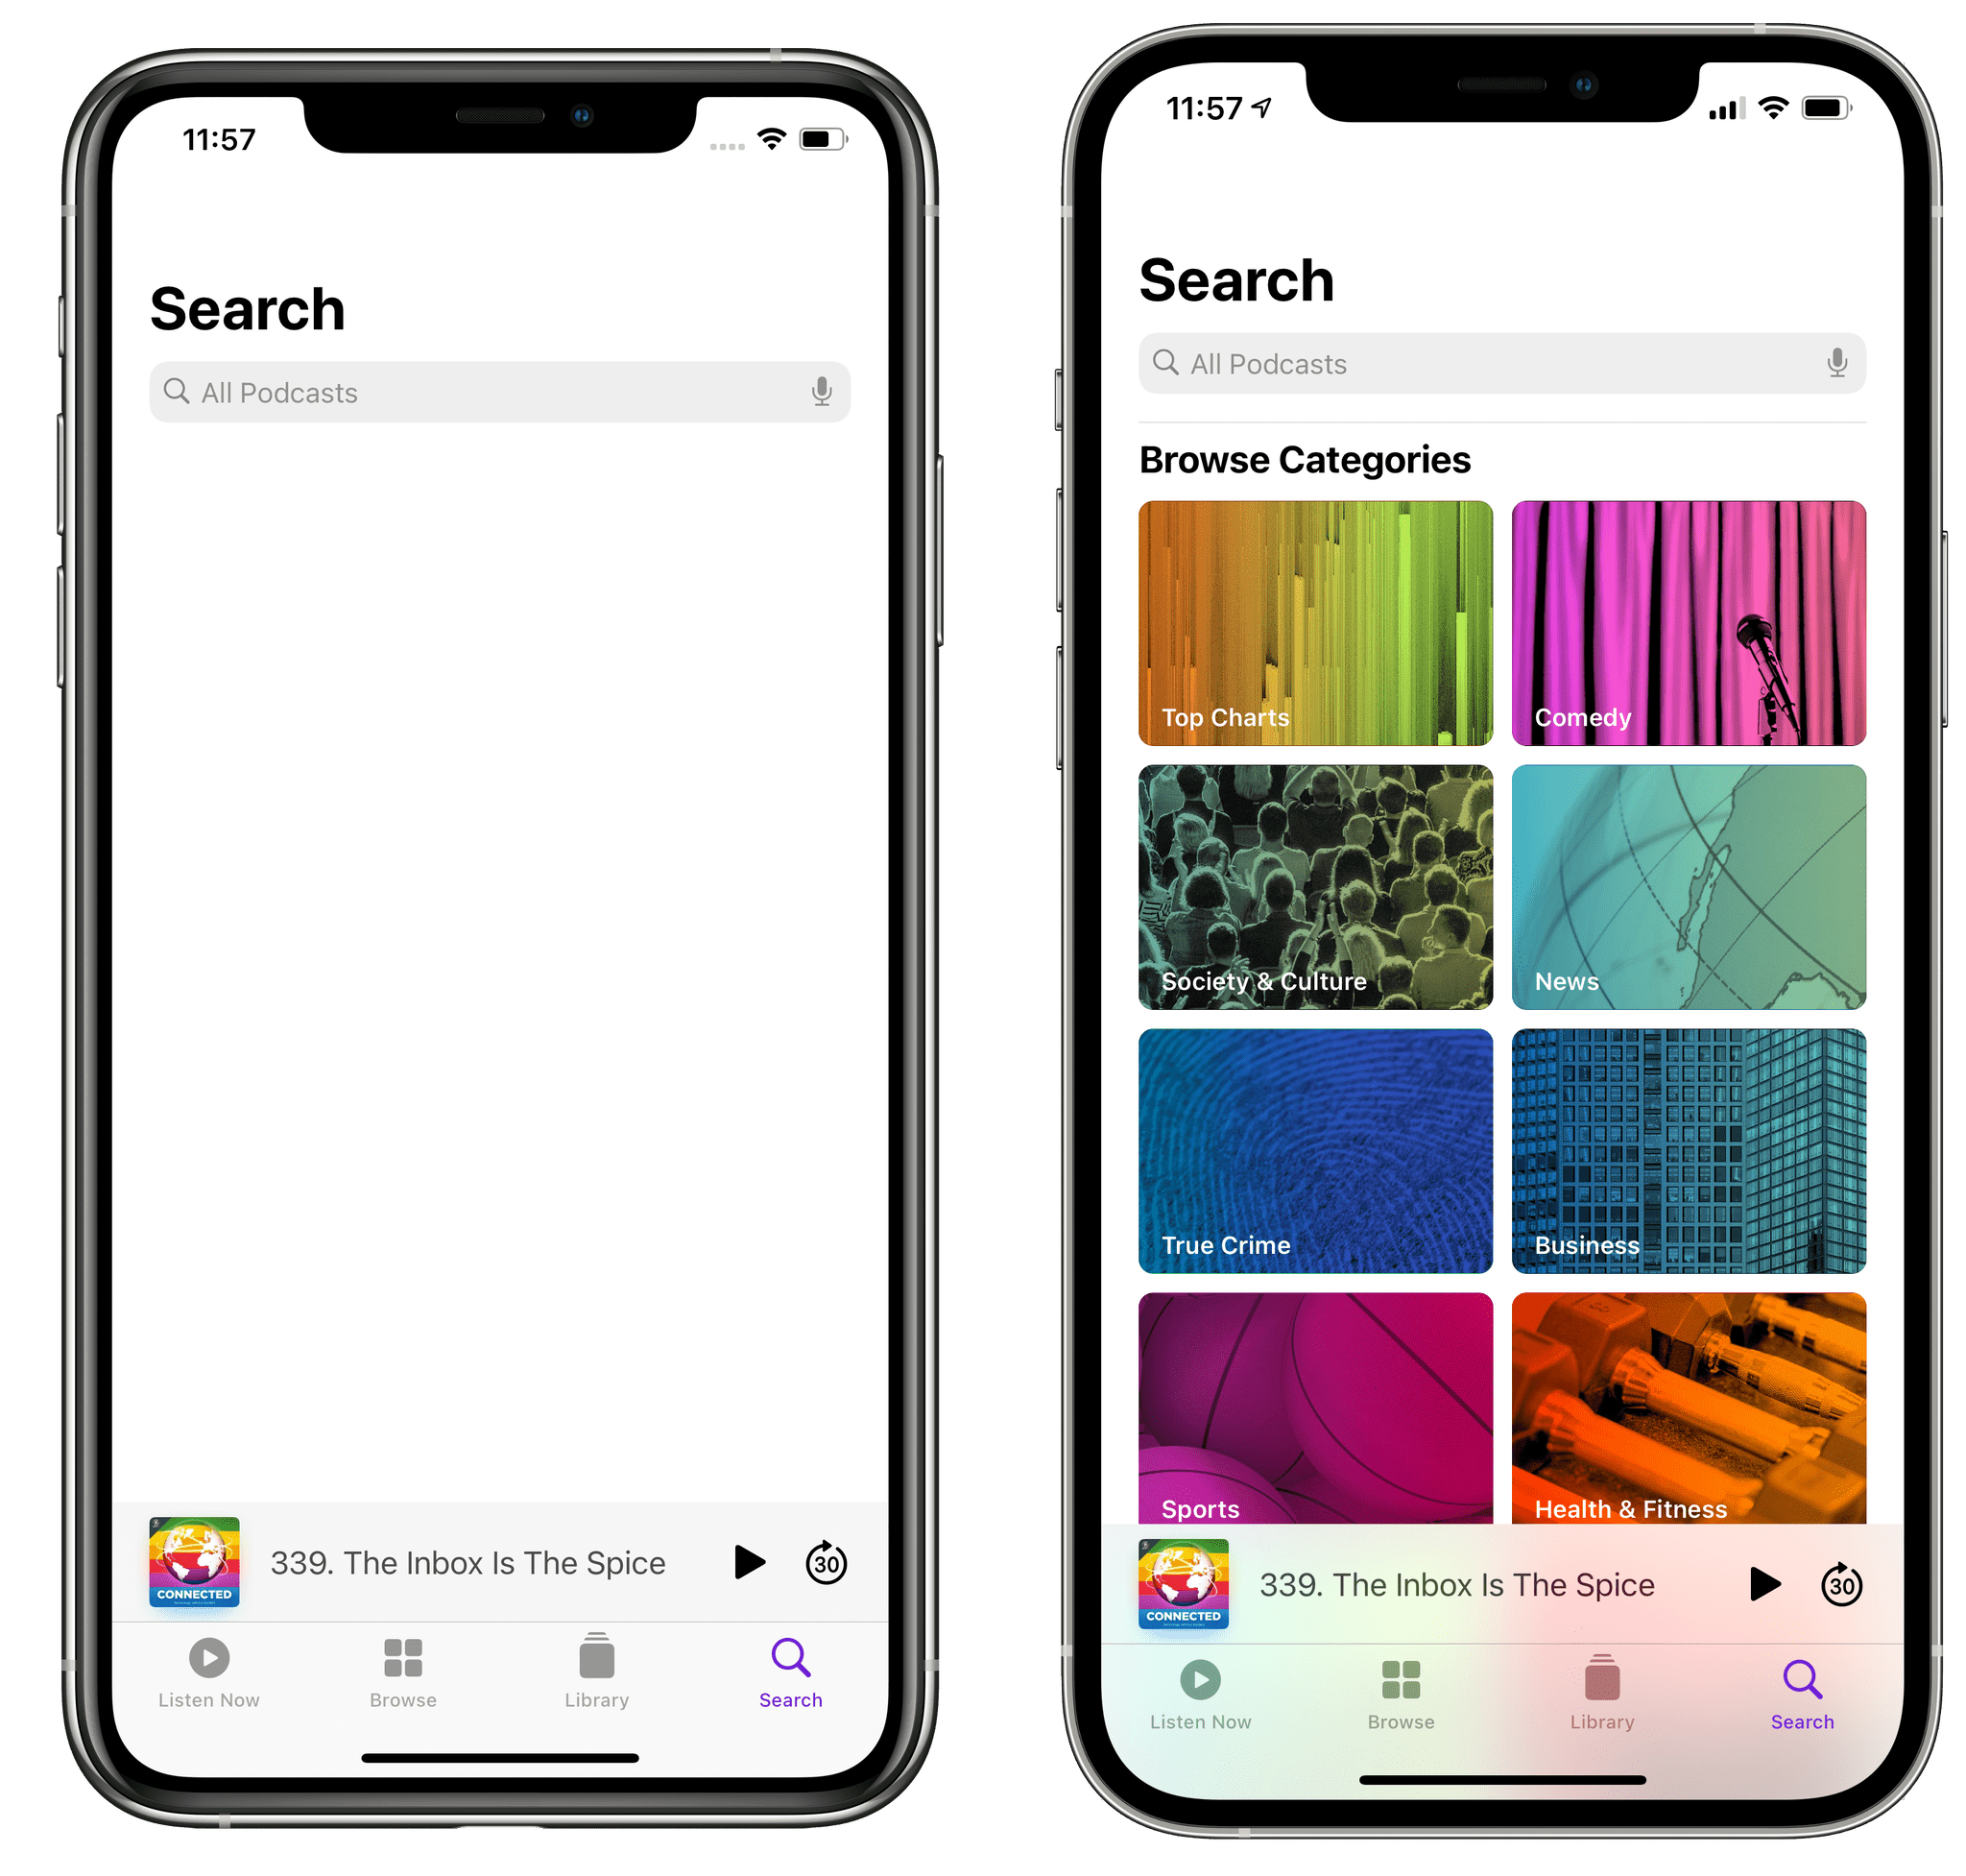 Tell me you're feeling the pressure from Spotify without telling me you're feeling the pressure from Spotify. (Pictured left: iOS 14.4's old search page in Podcasts.)